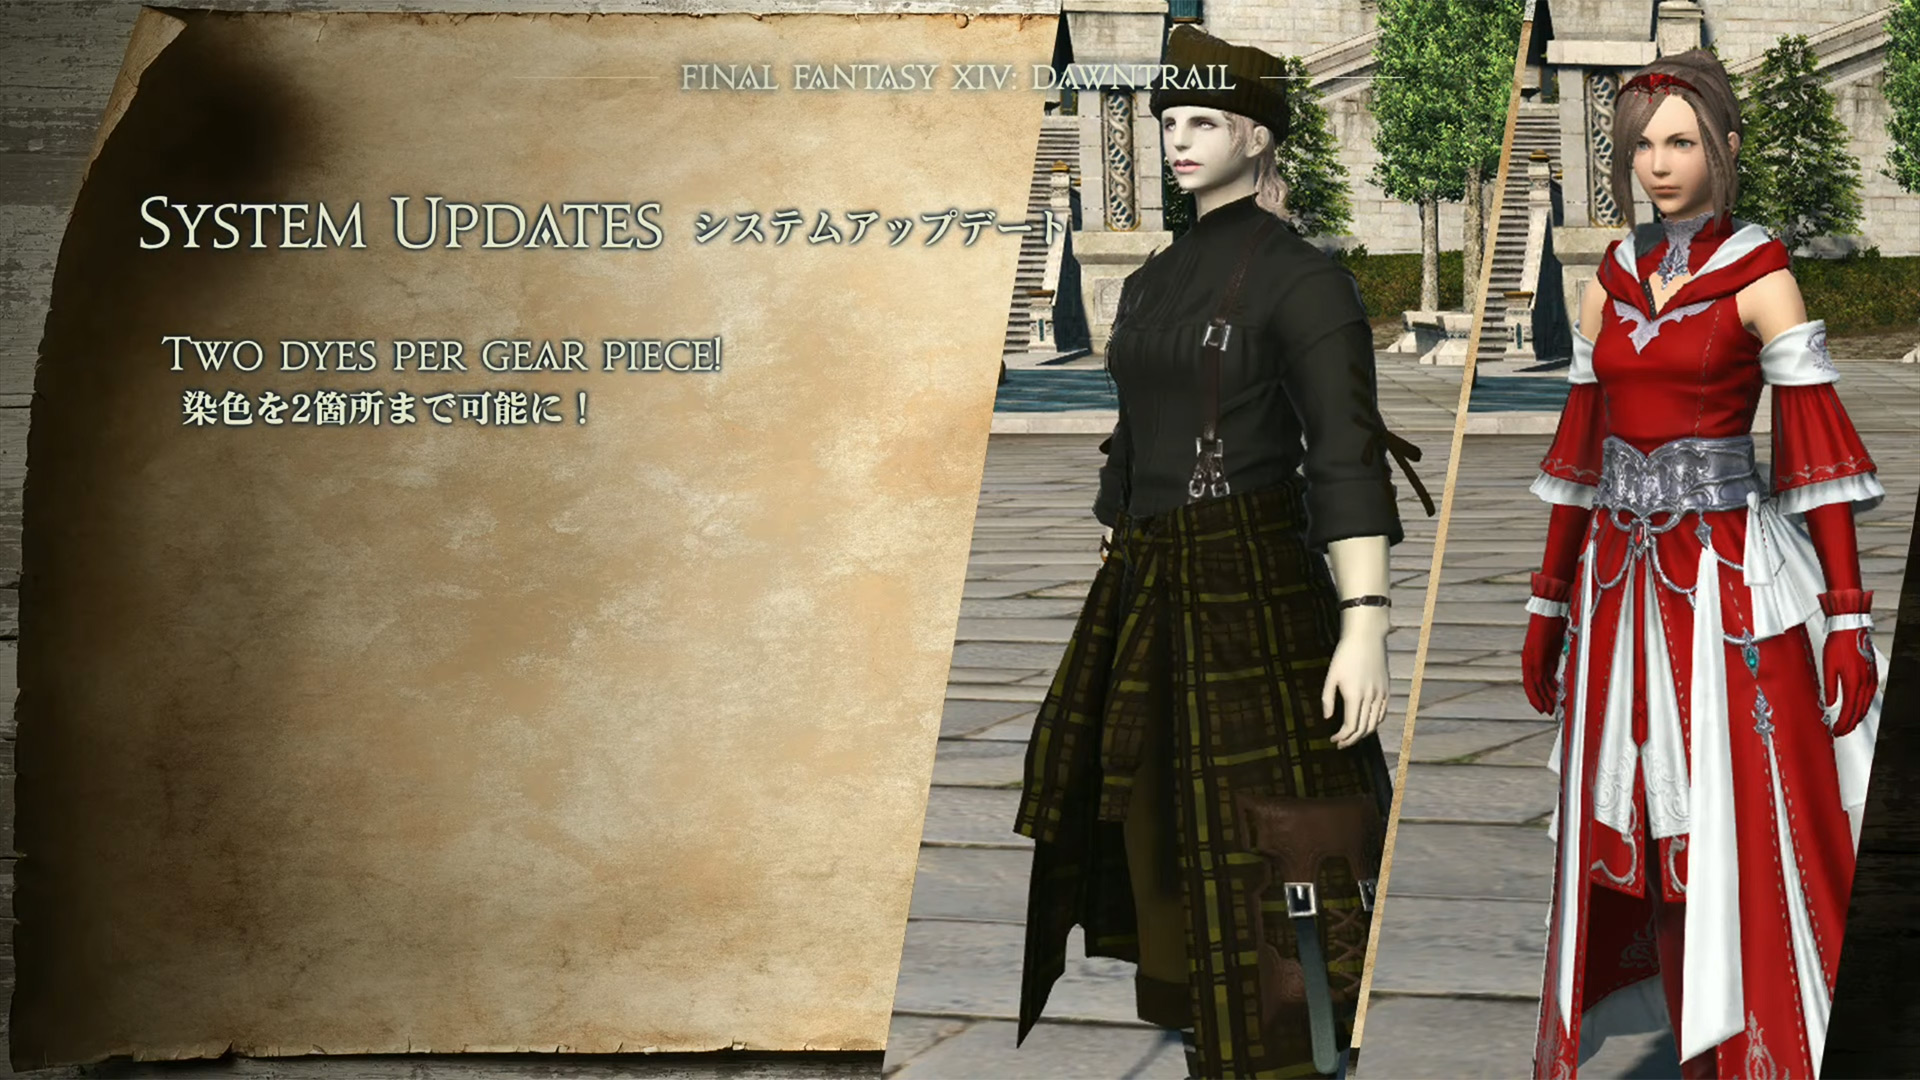 Final Fantasy XIV: Dawntrail will allow players to apply two dyes per gear piece